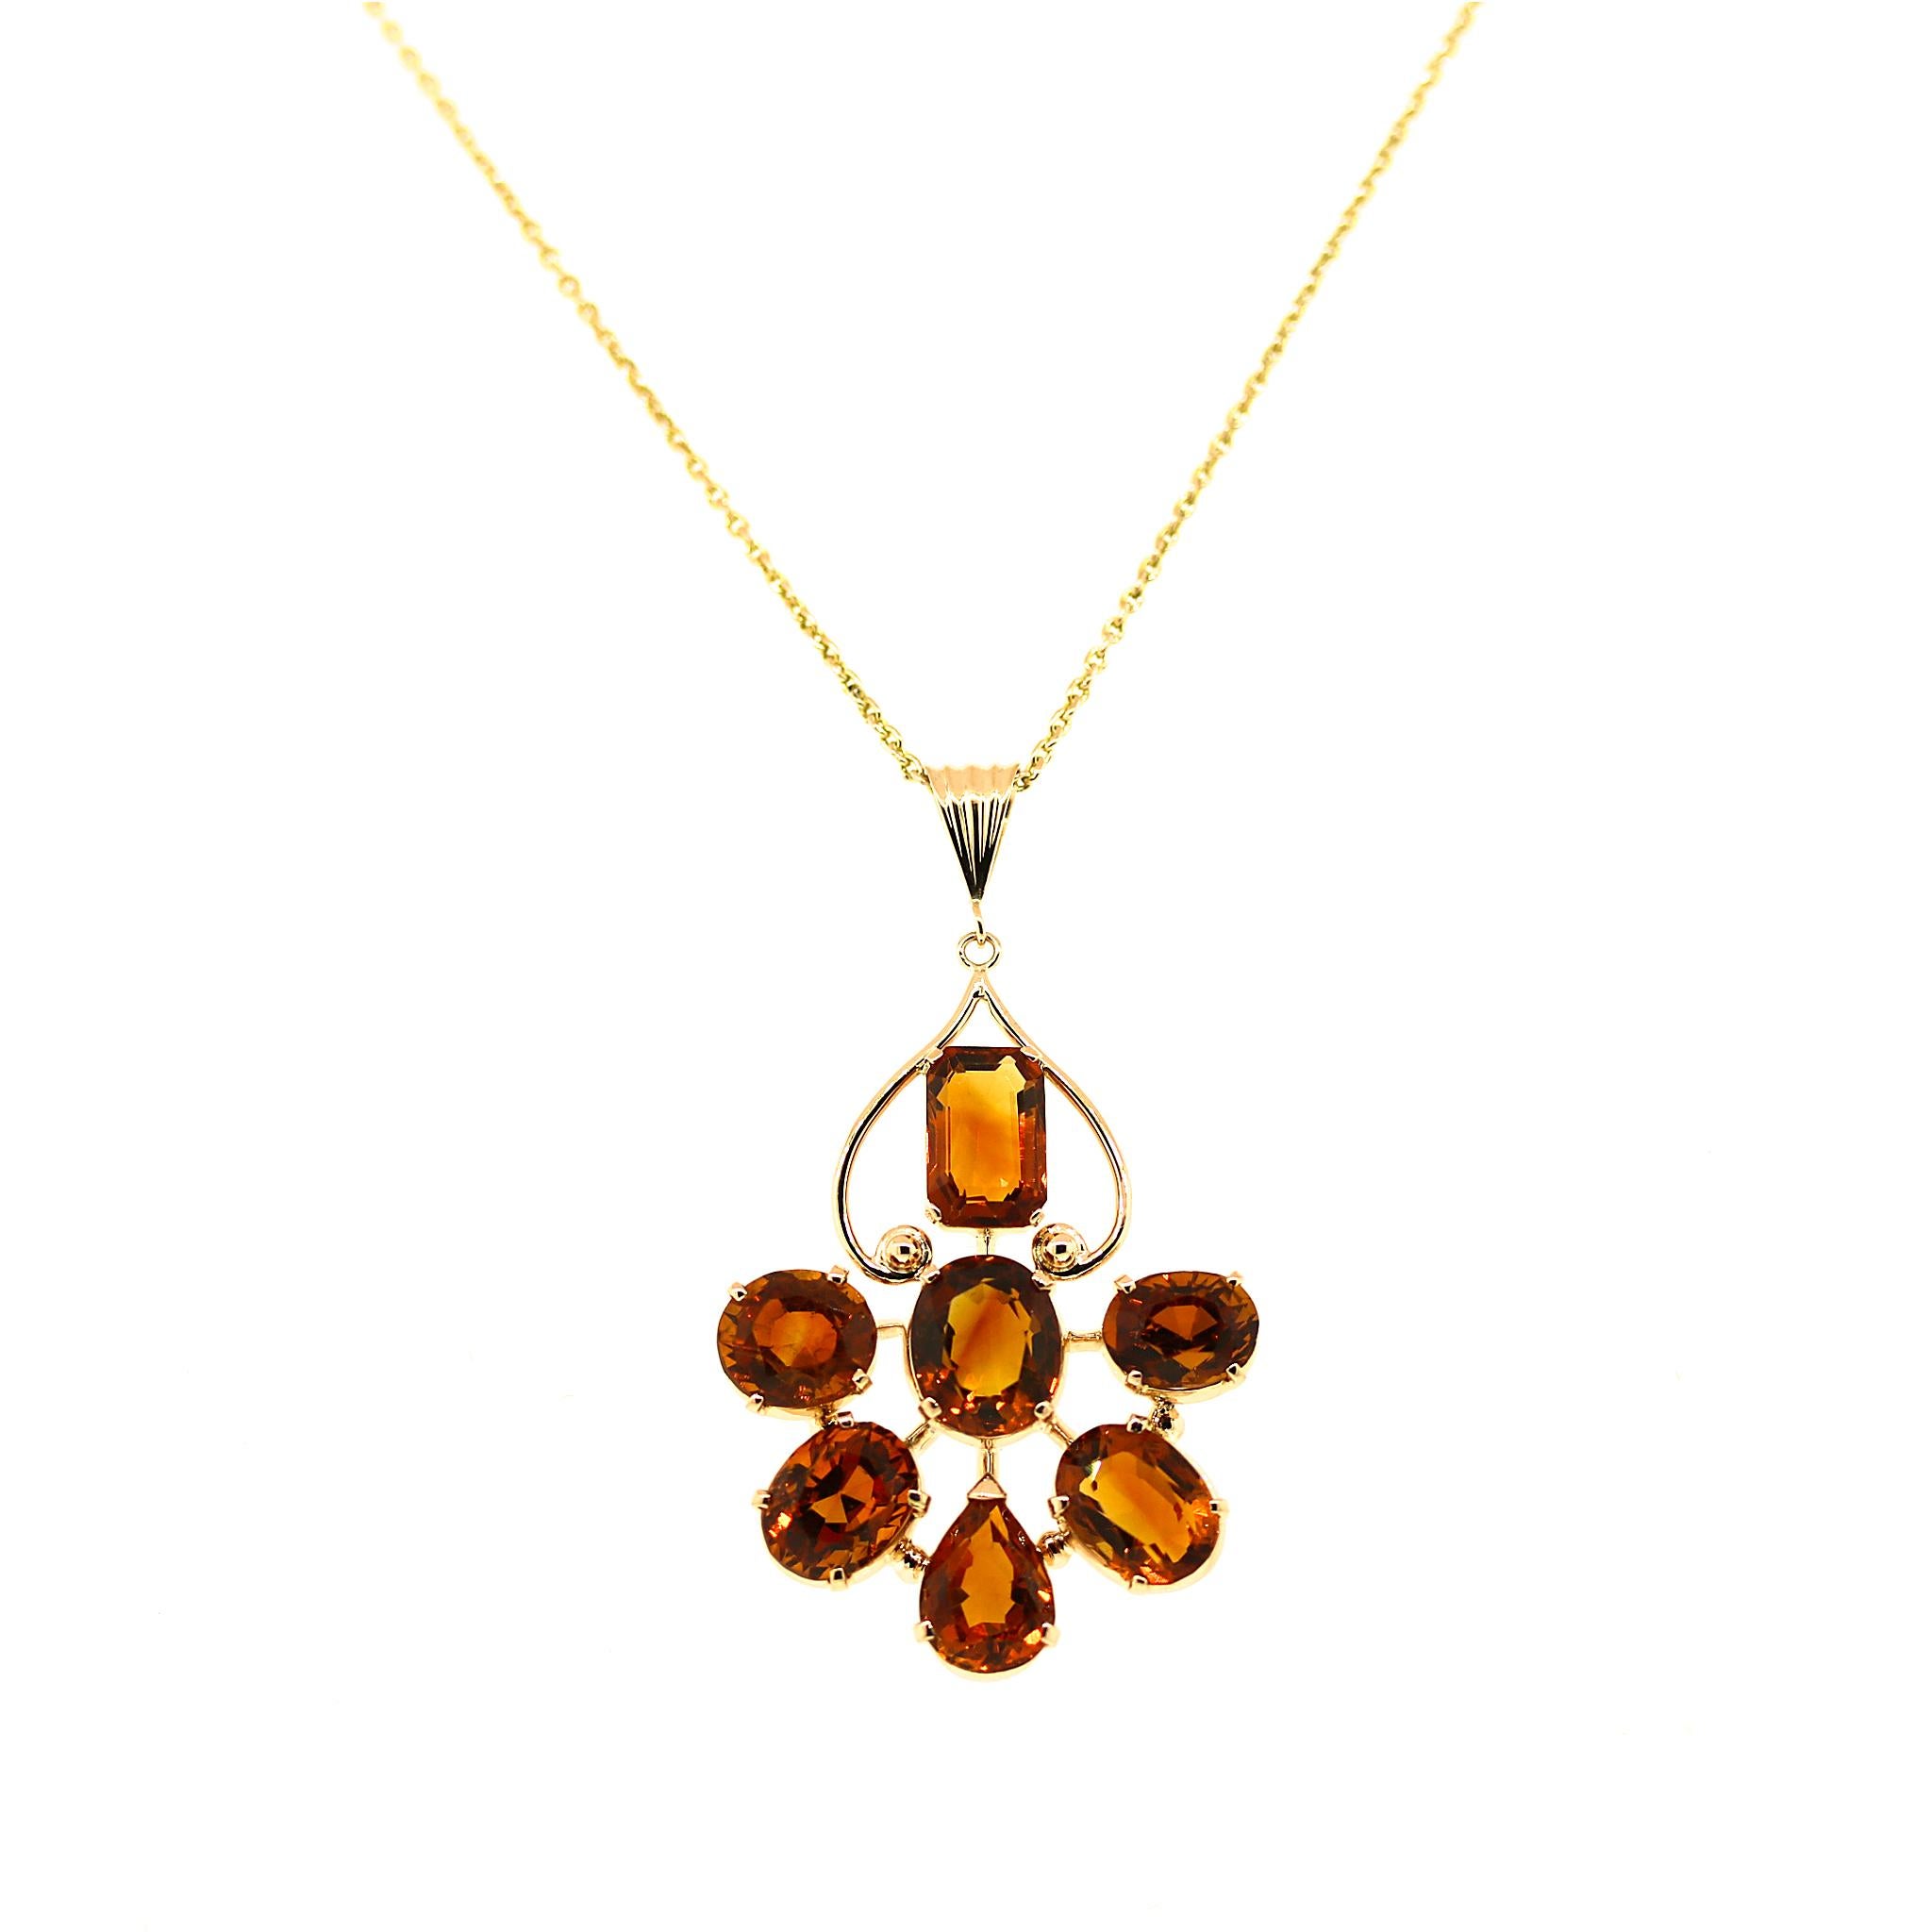 Mixed Cut Madeira Citrine Pendant Necklace For Sale